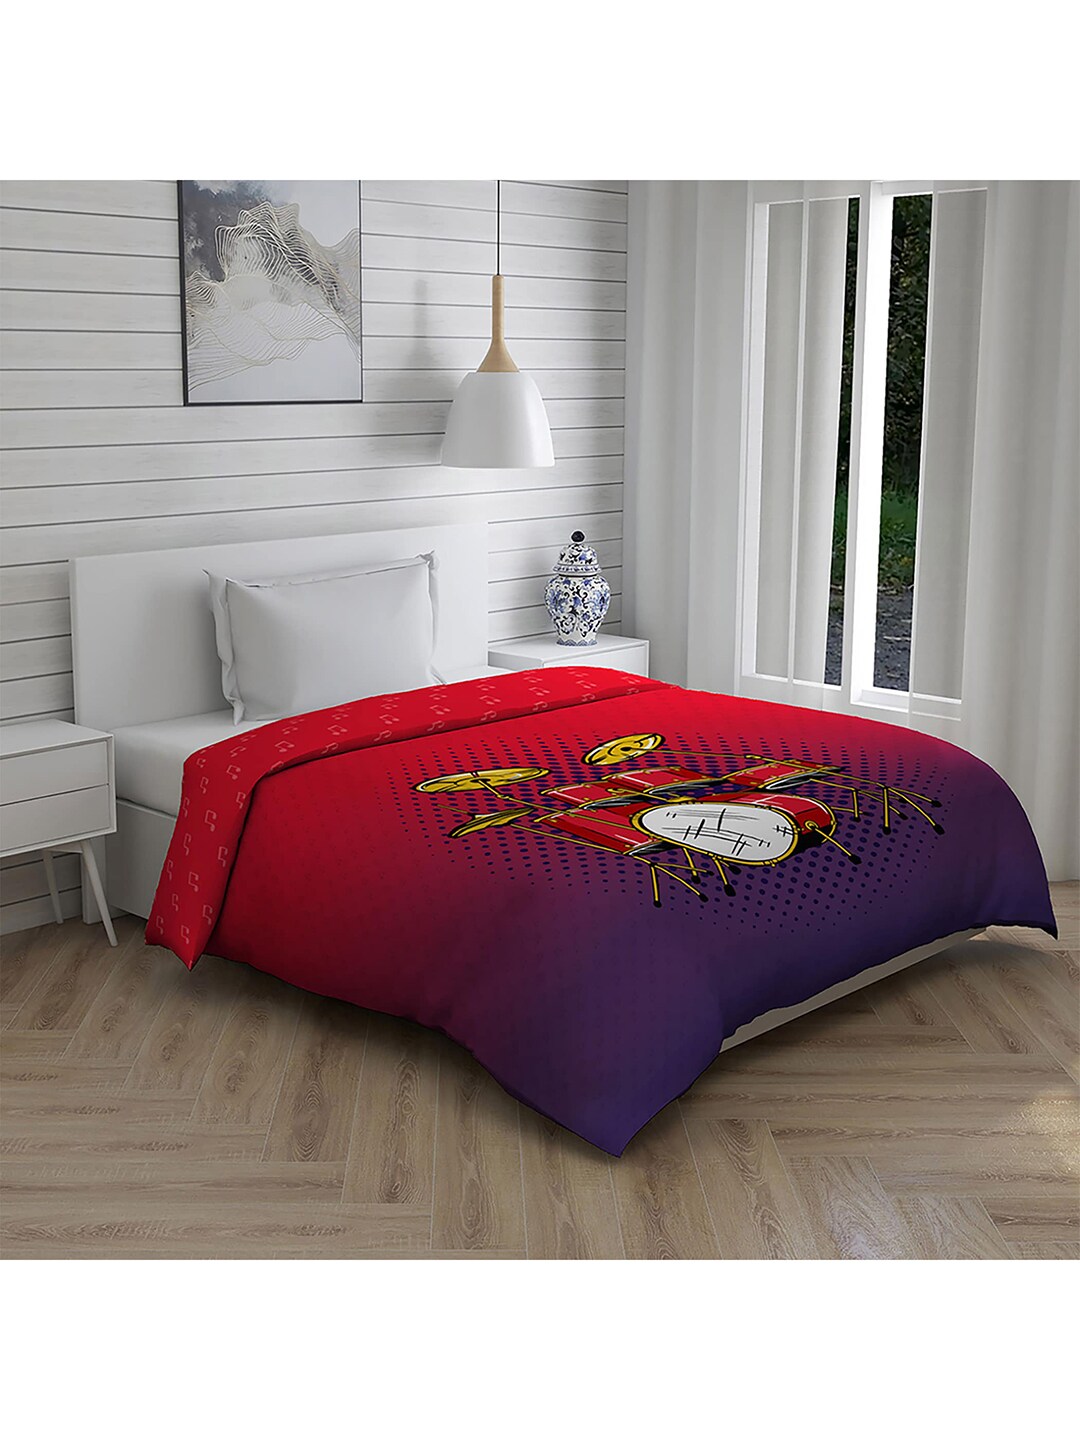 Boutique Living India Unisex Red Blankets Quilts and Dohars Price in India